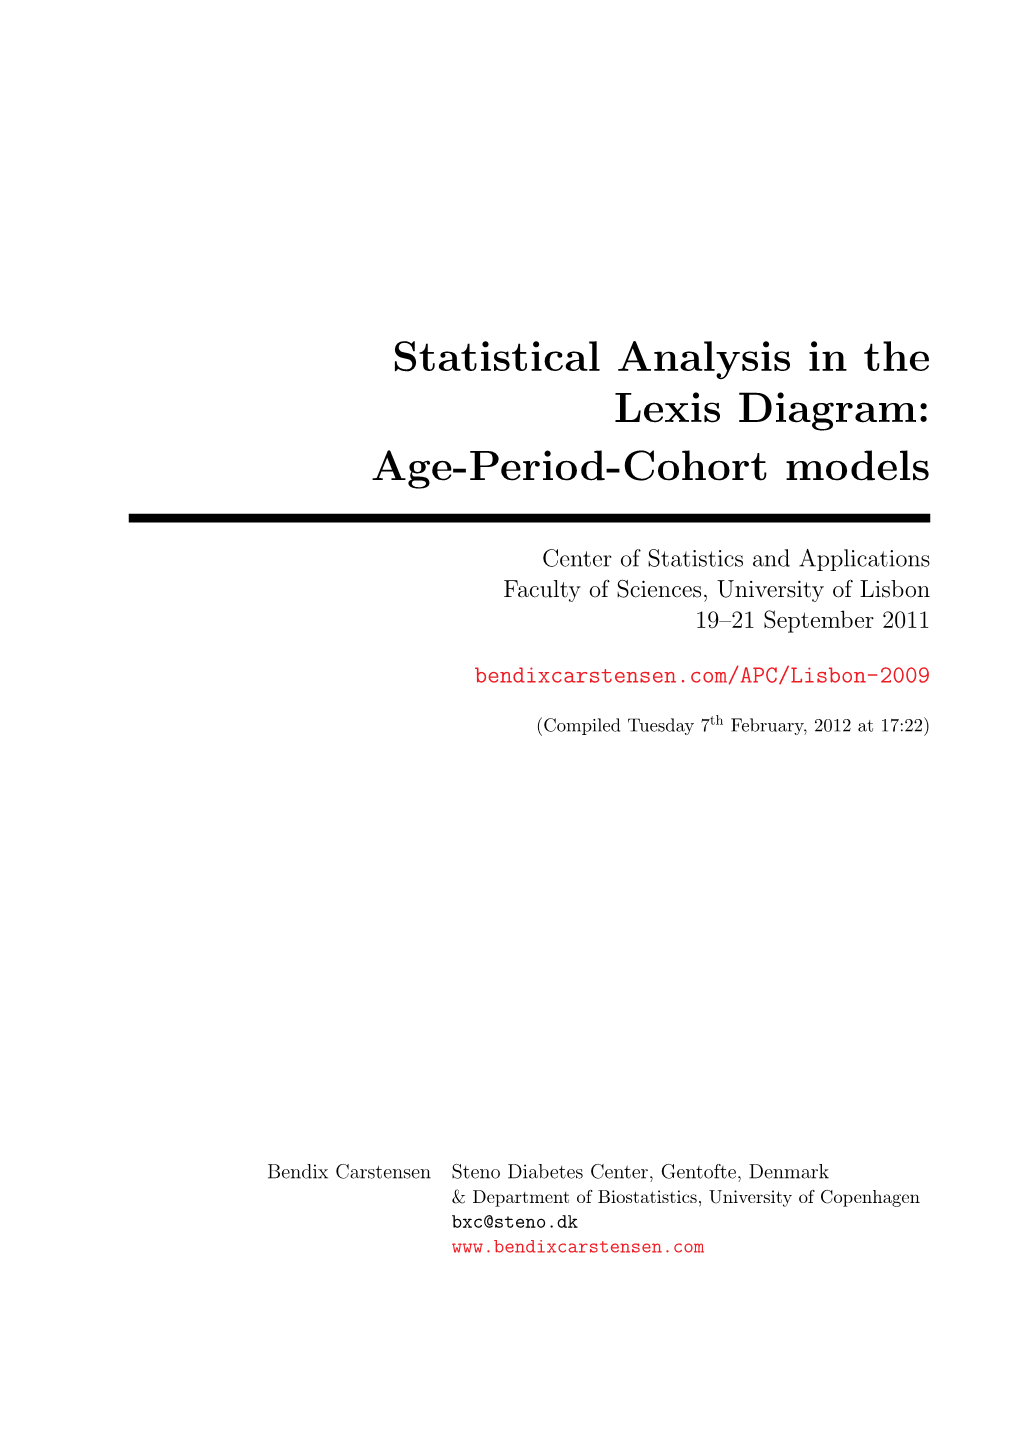 Statistical Analysis in the Lexis Diagram: Age-Period-Cohort Models